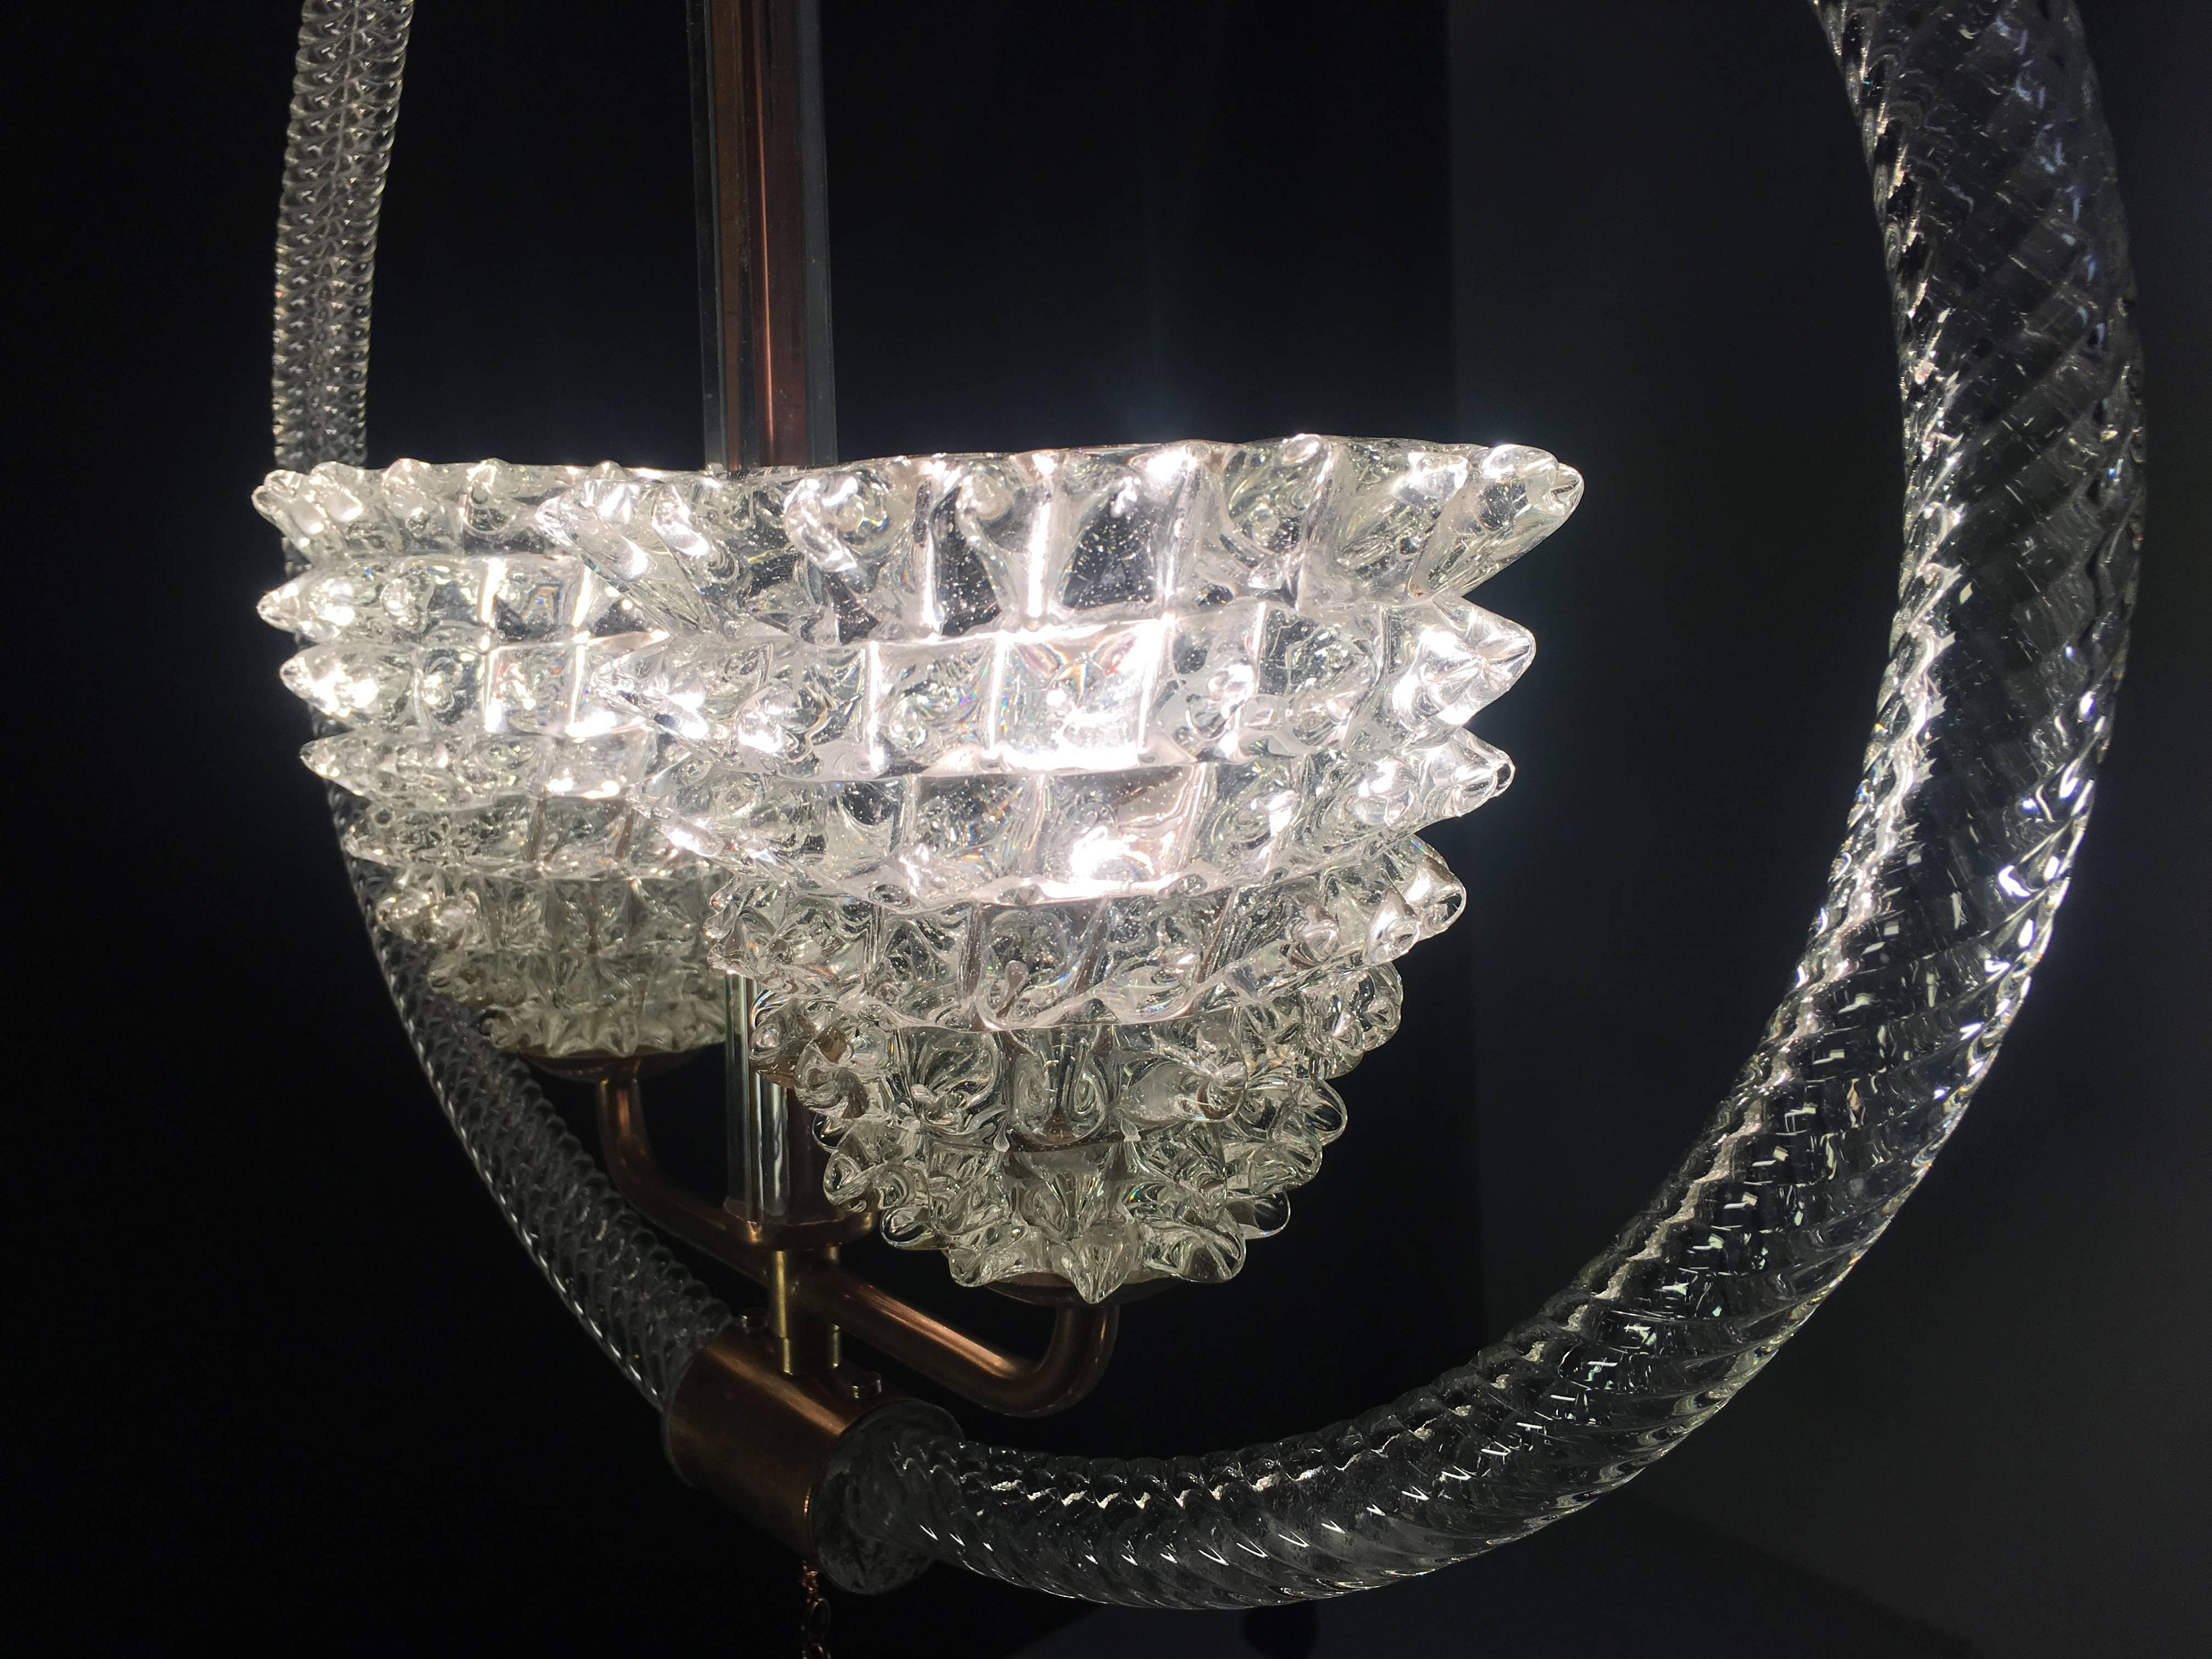 Charming Italian Chandelier by Ercole Barovier, Murano, 1940 For Sale 14